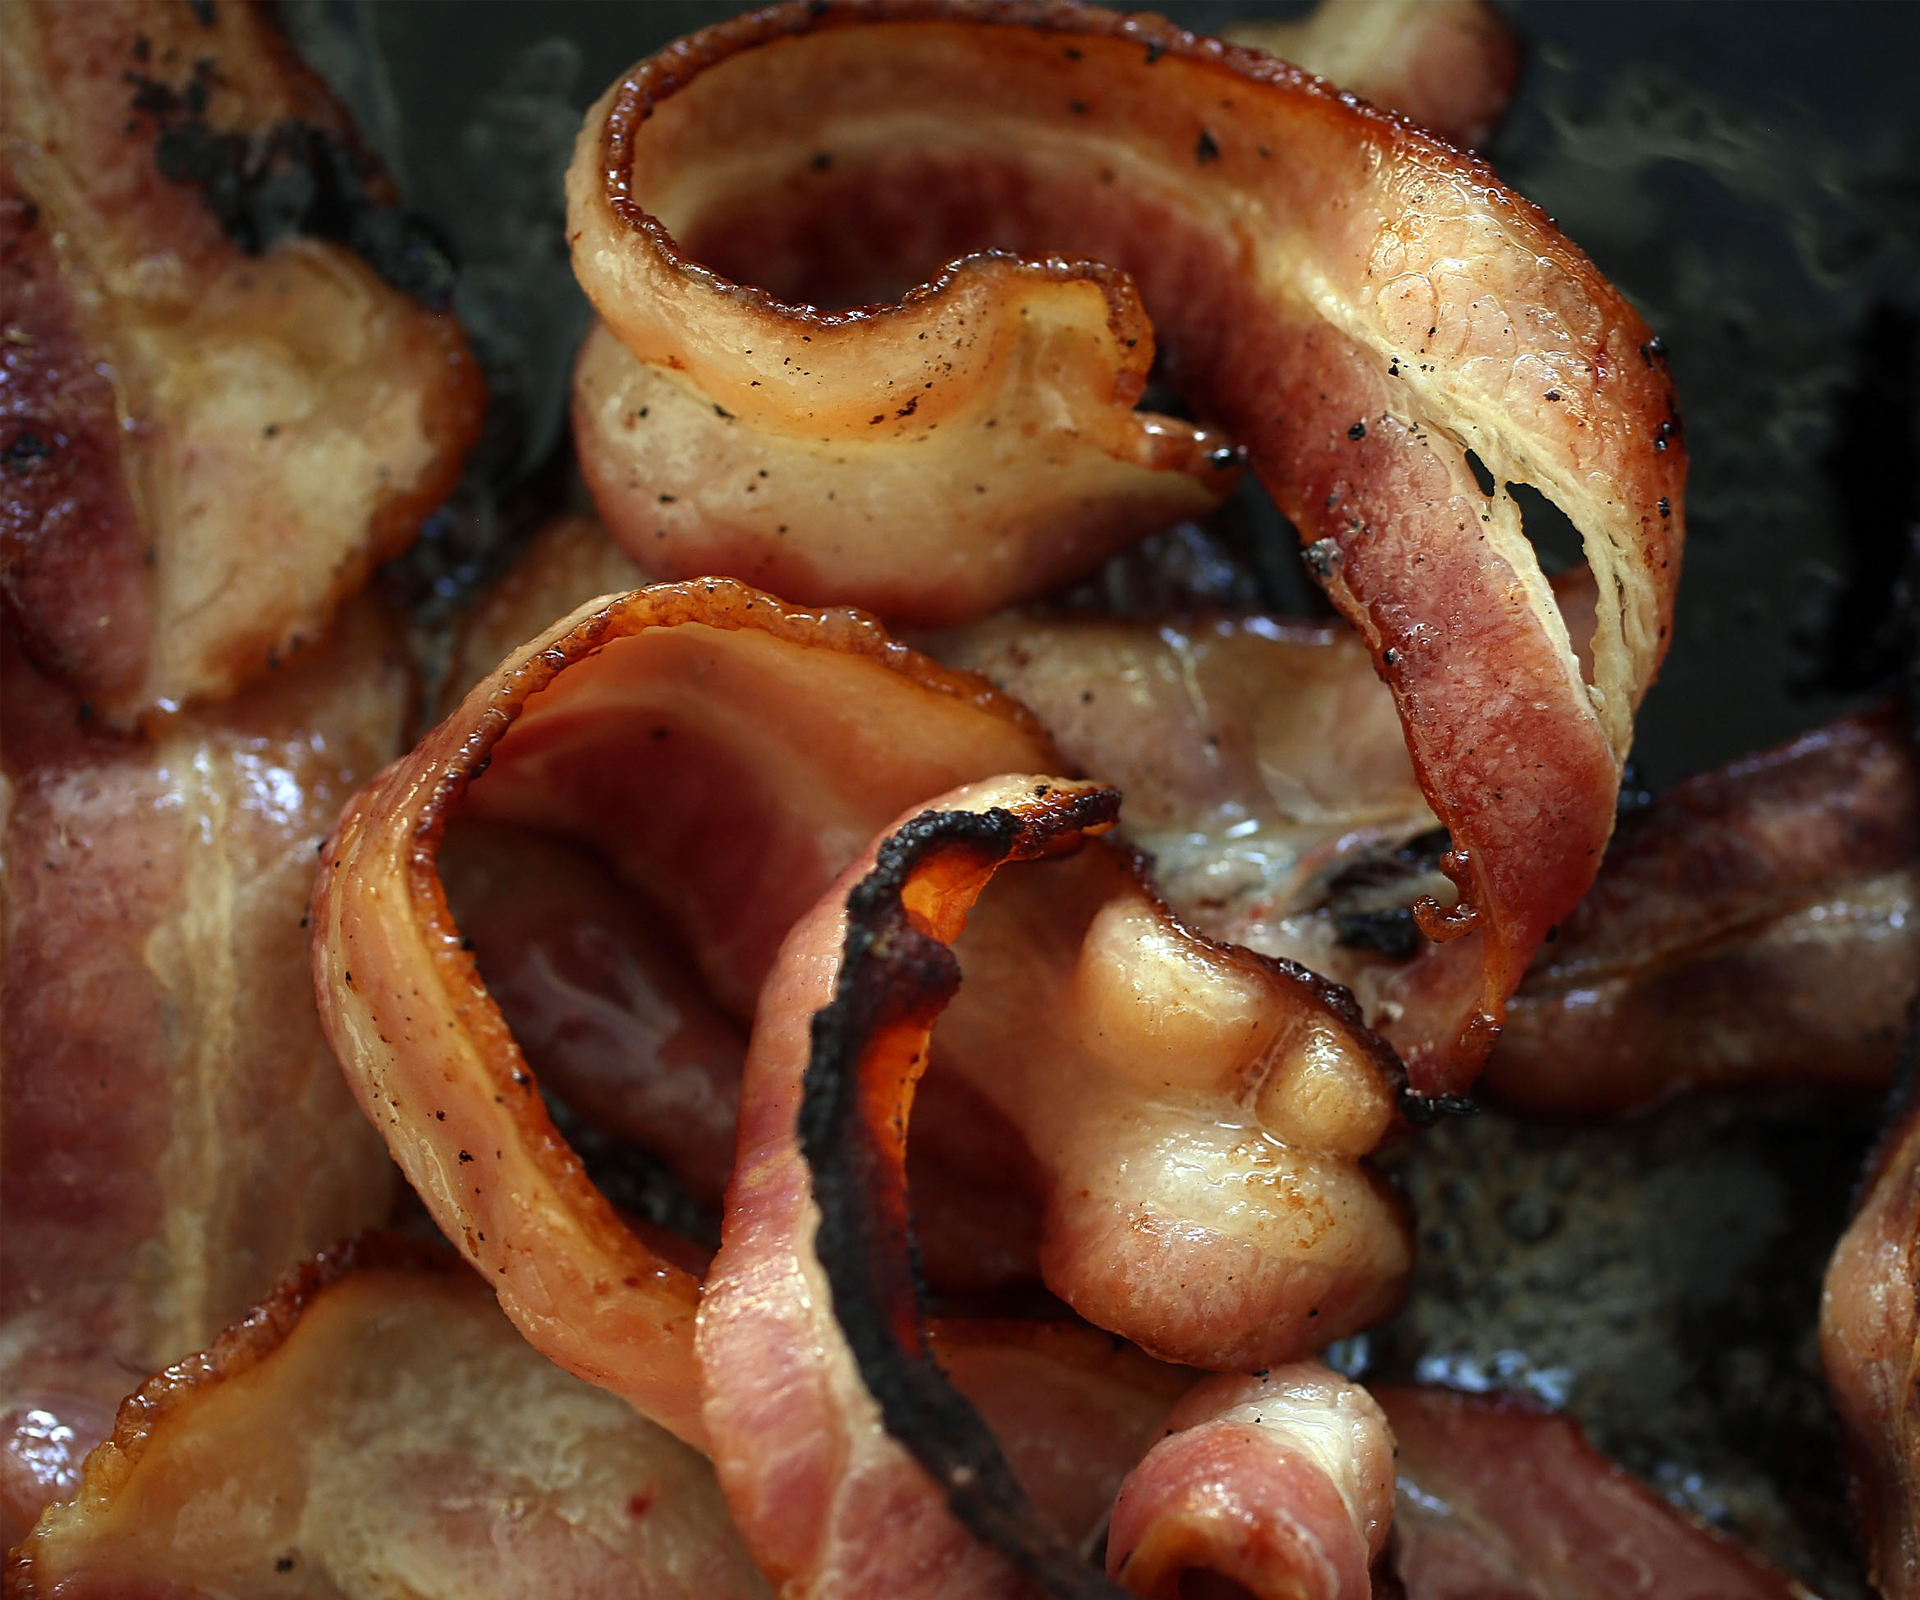 WHO: Bacon increases cancer risk